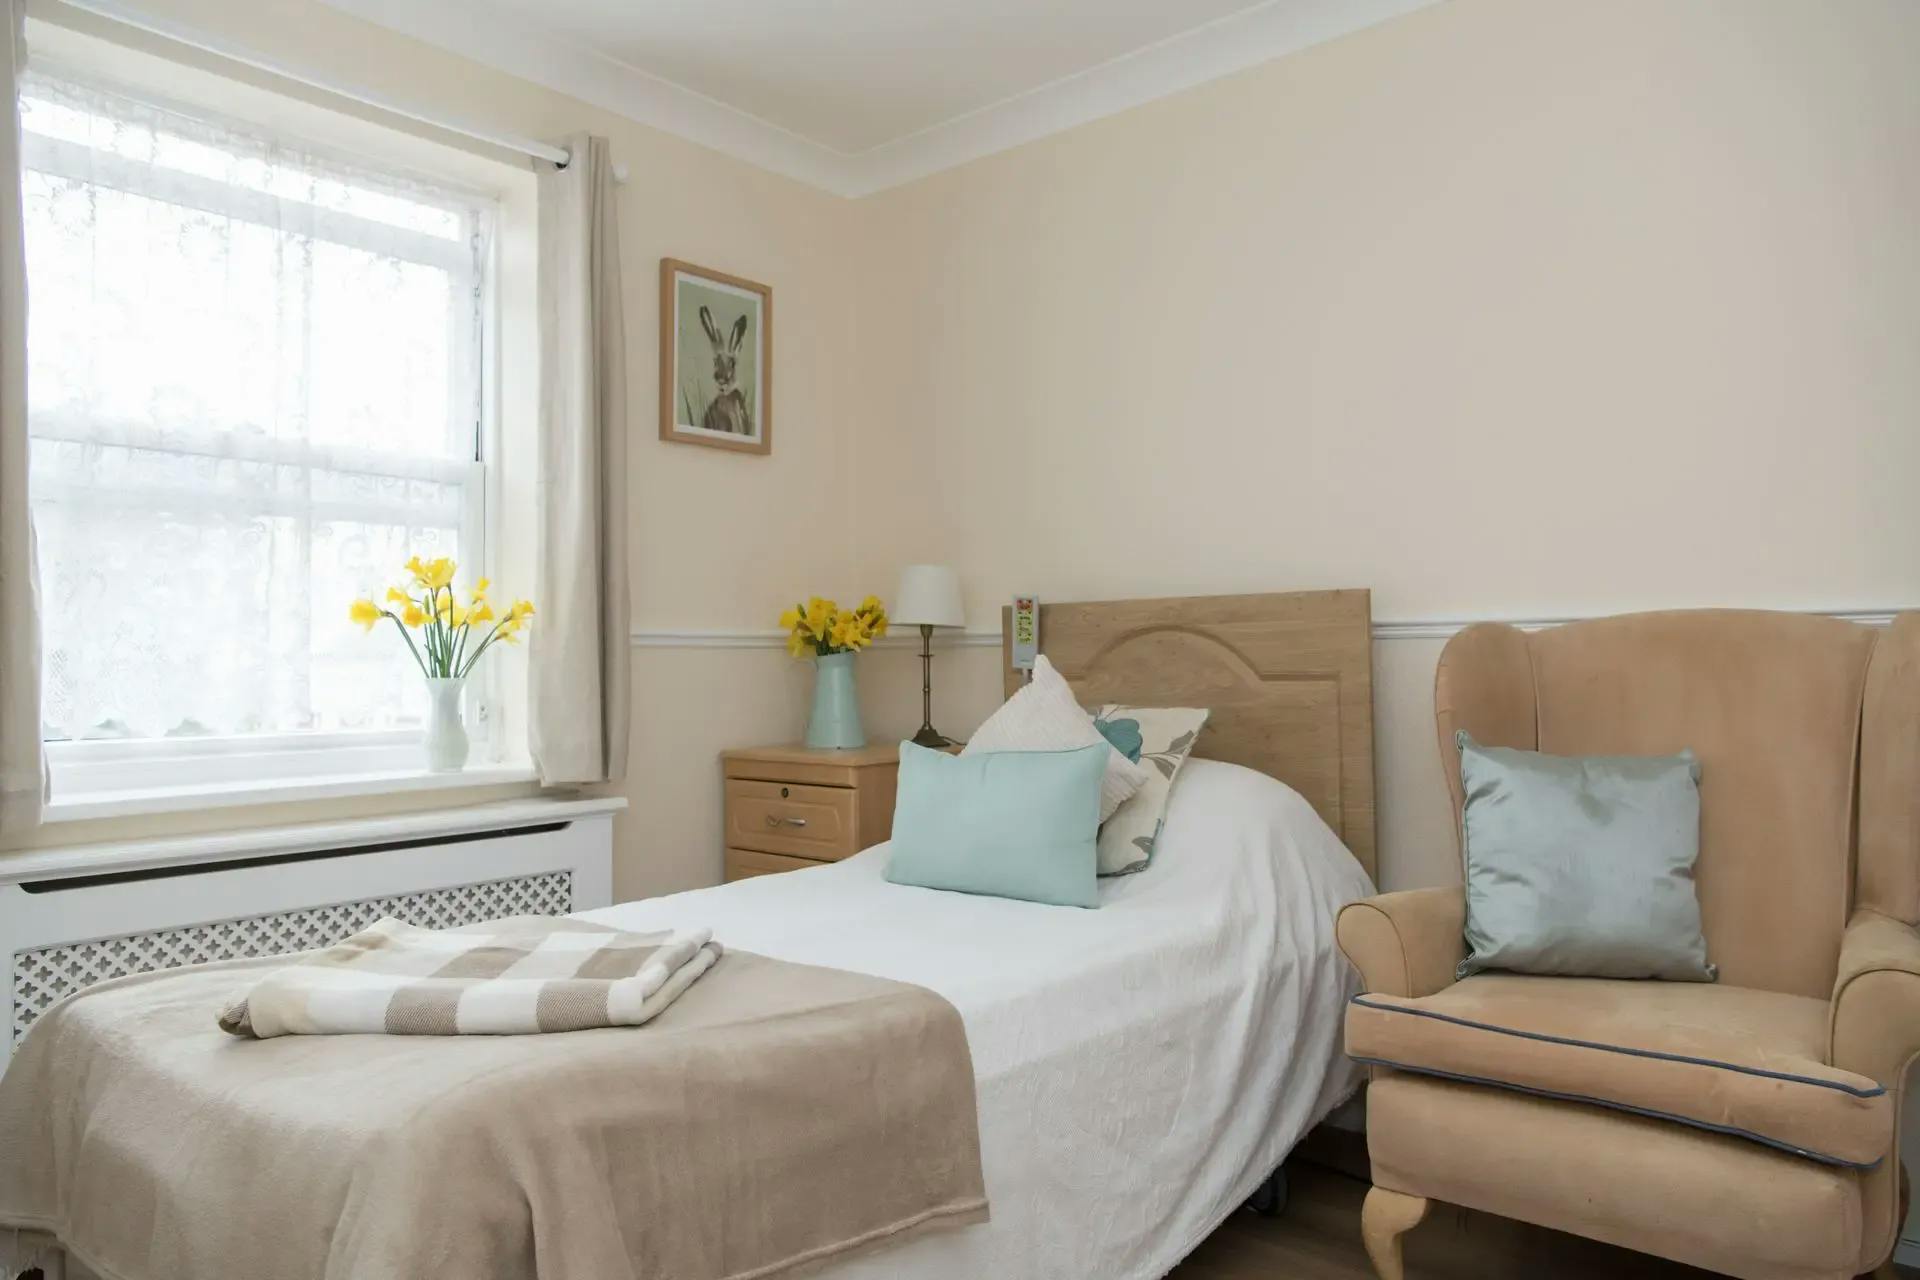 Bedroom at Firtree House Care Home in Tunbridge Wells, Kent